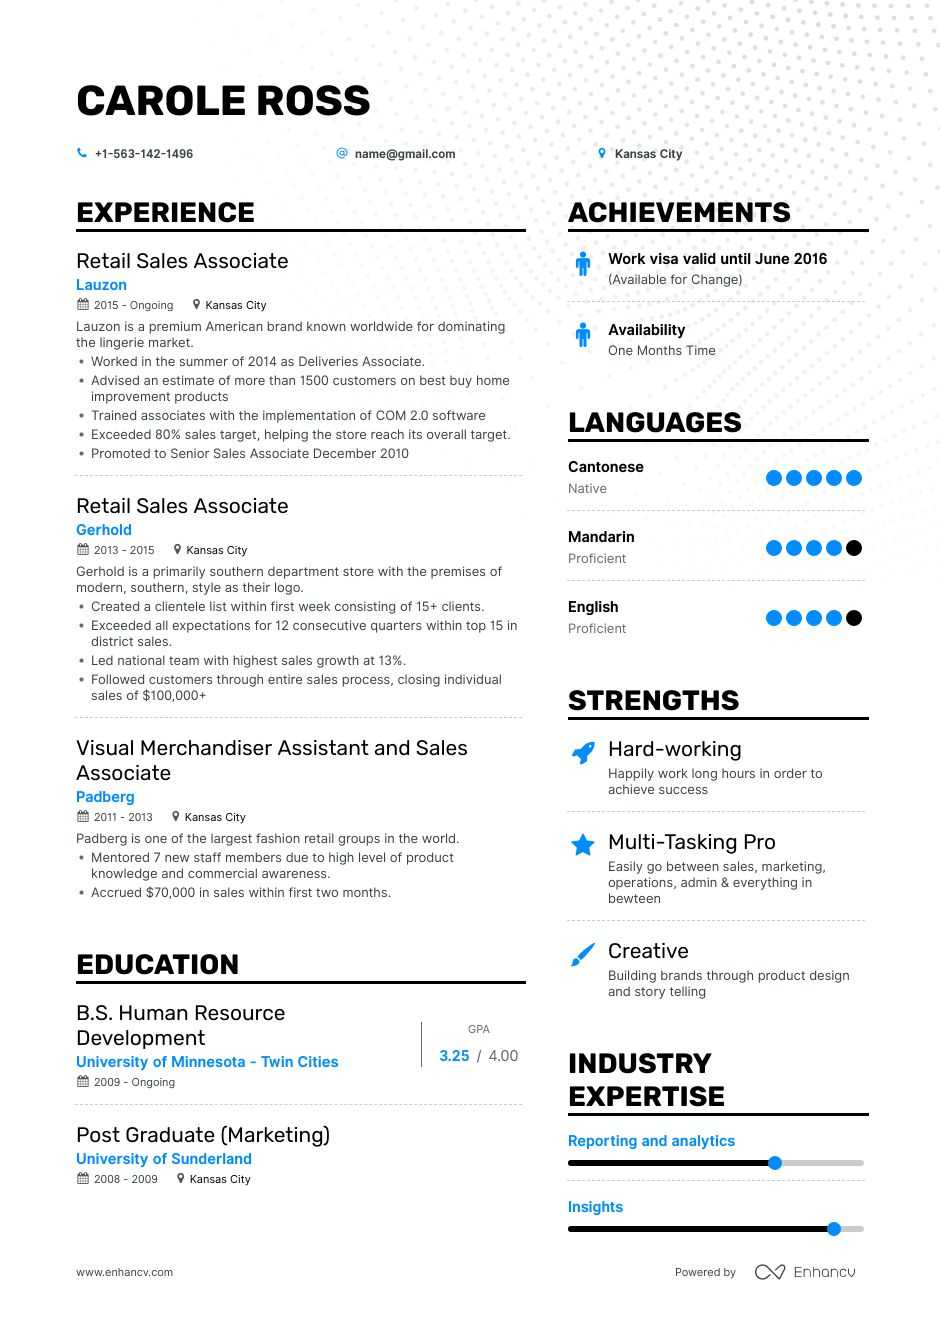 How to make a resume for a sales associate job